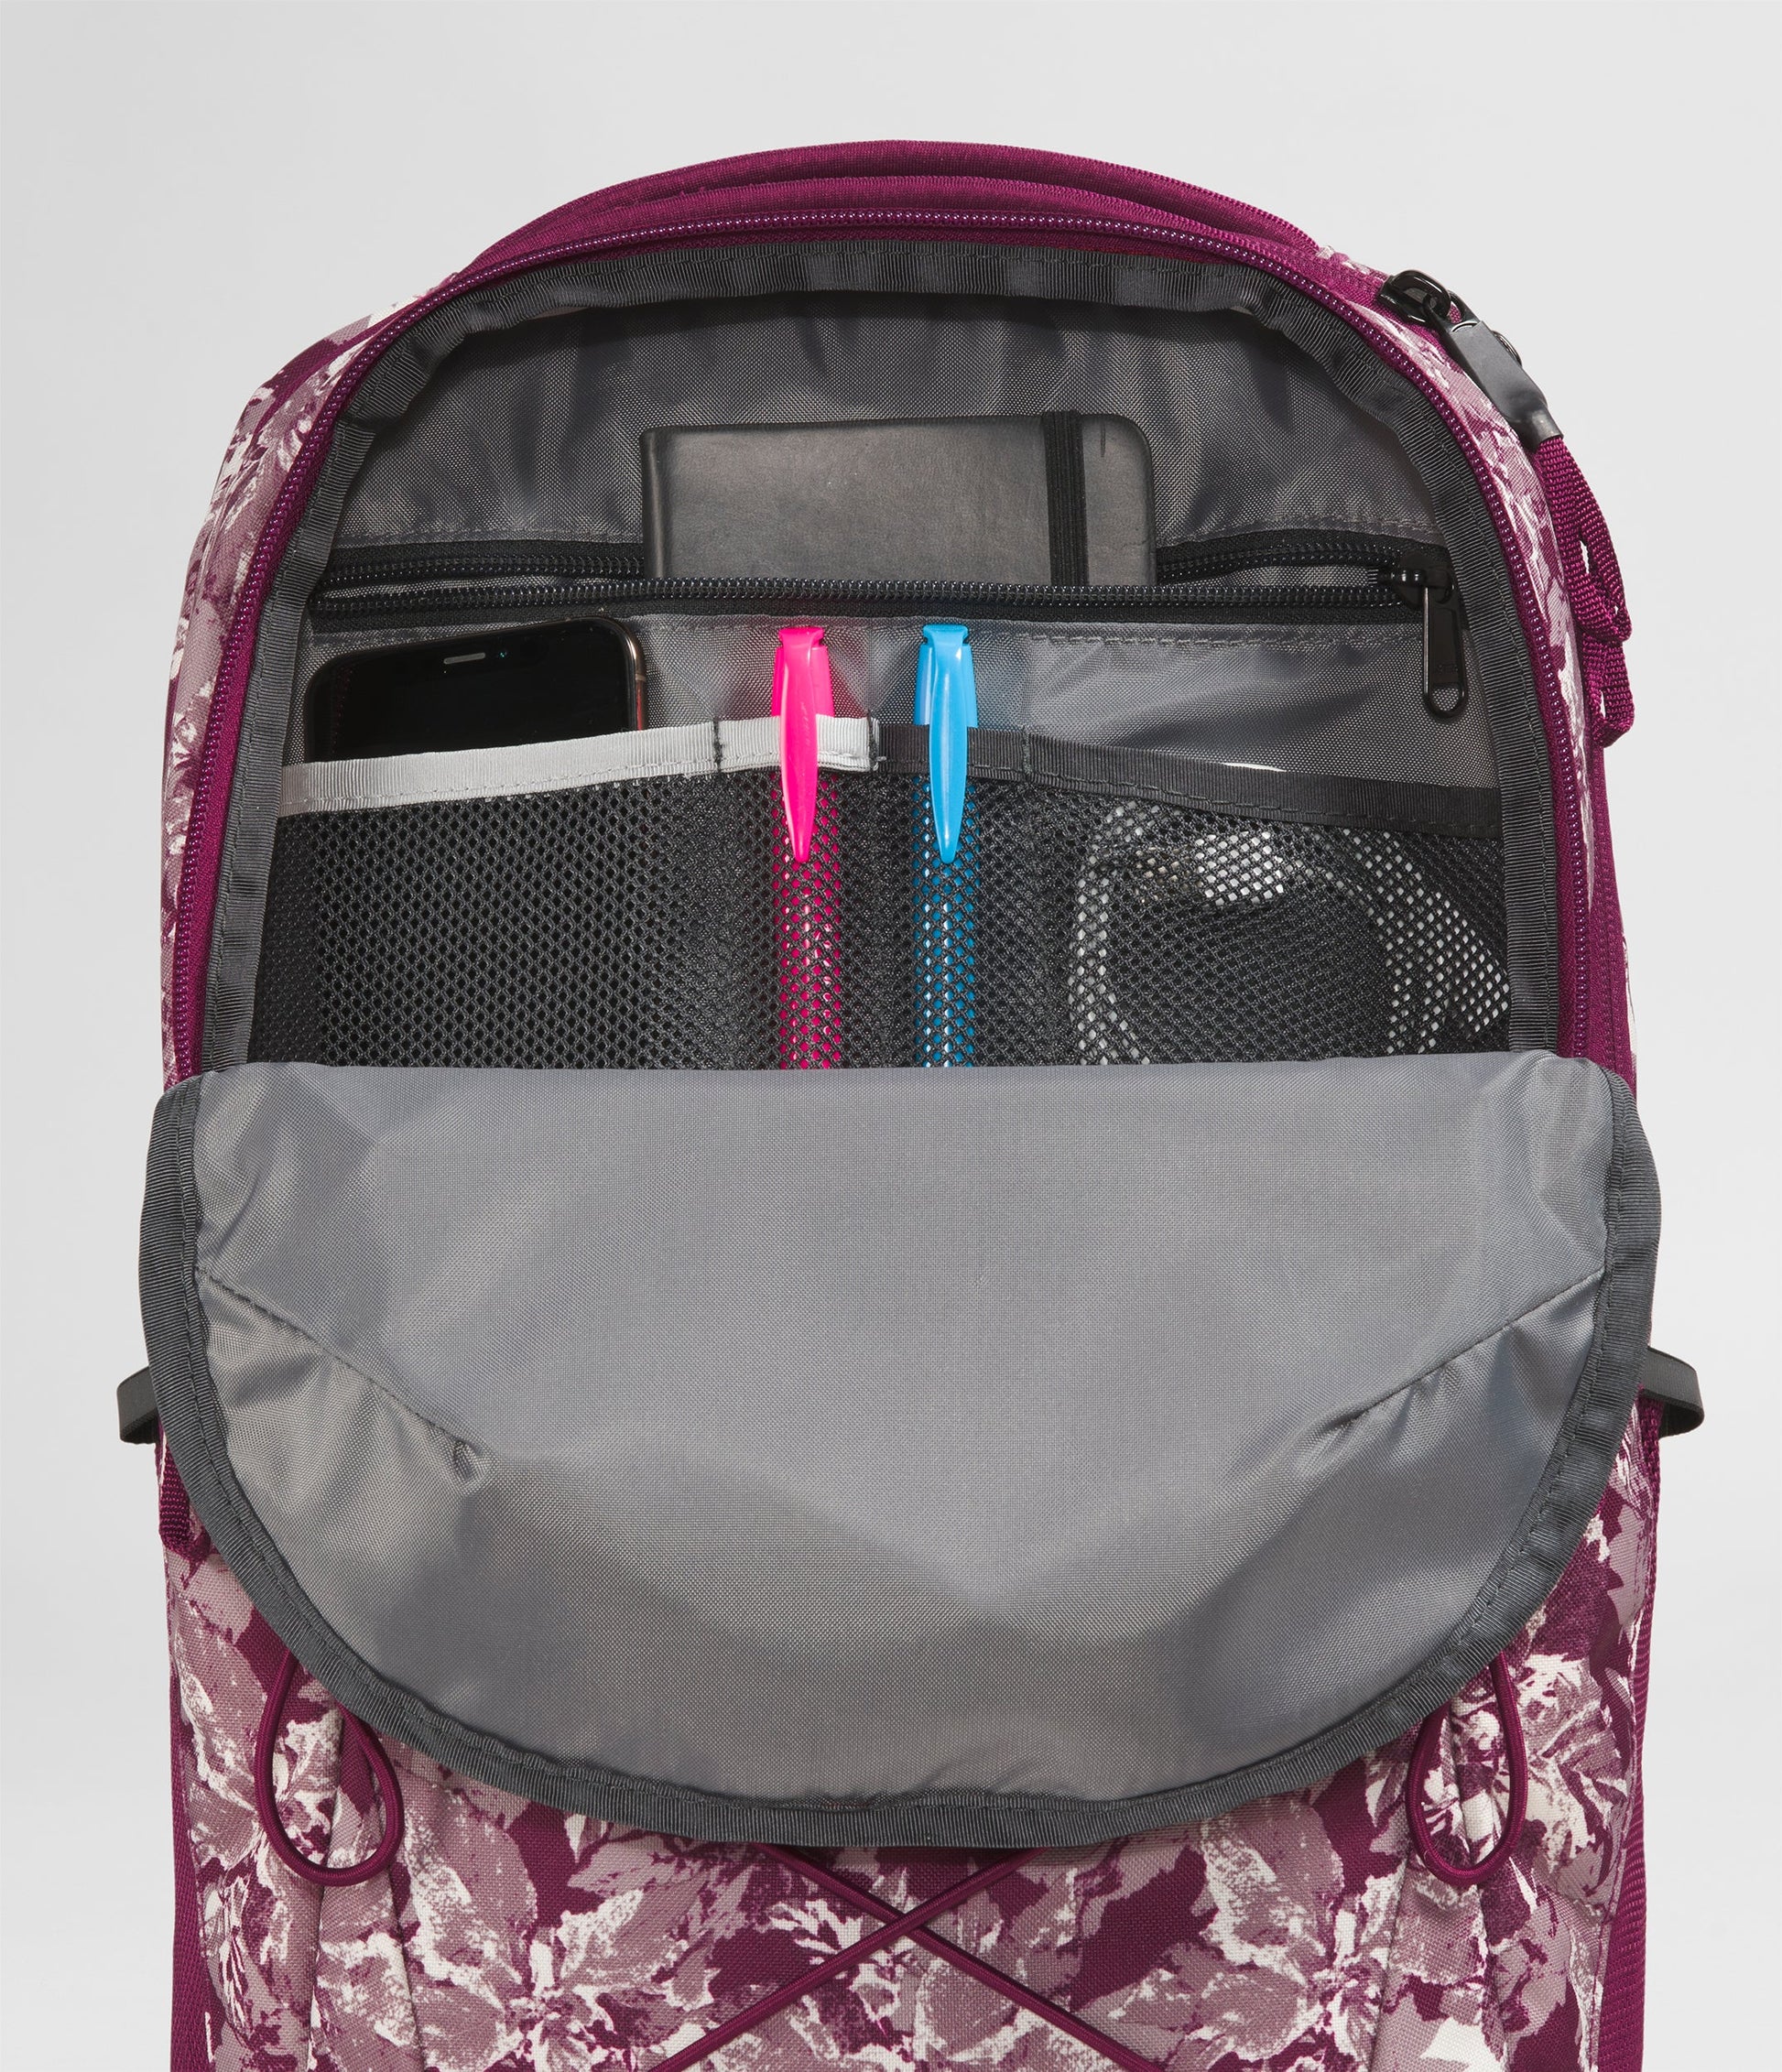 The North Face Women’s Jester Backpack - Boysenberry Coleus Camo Print